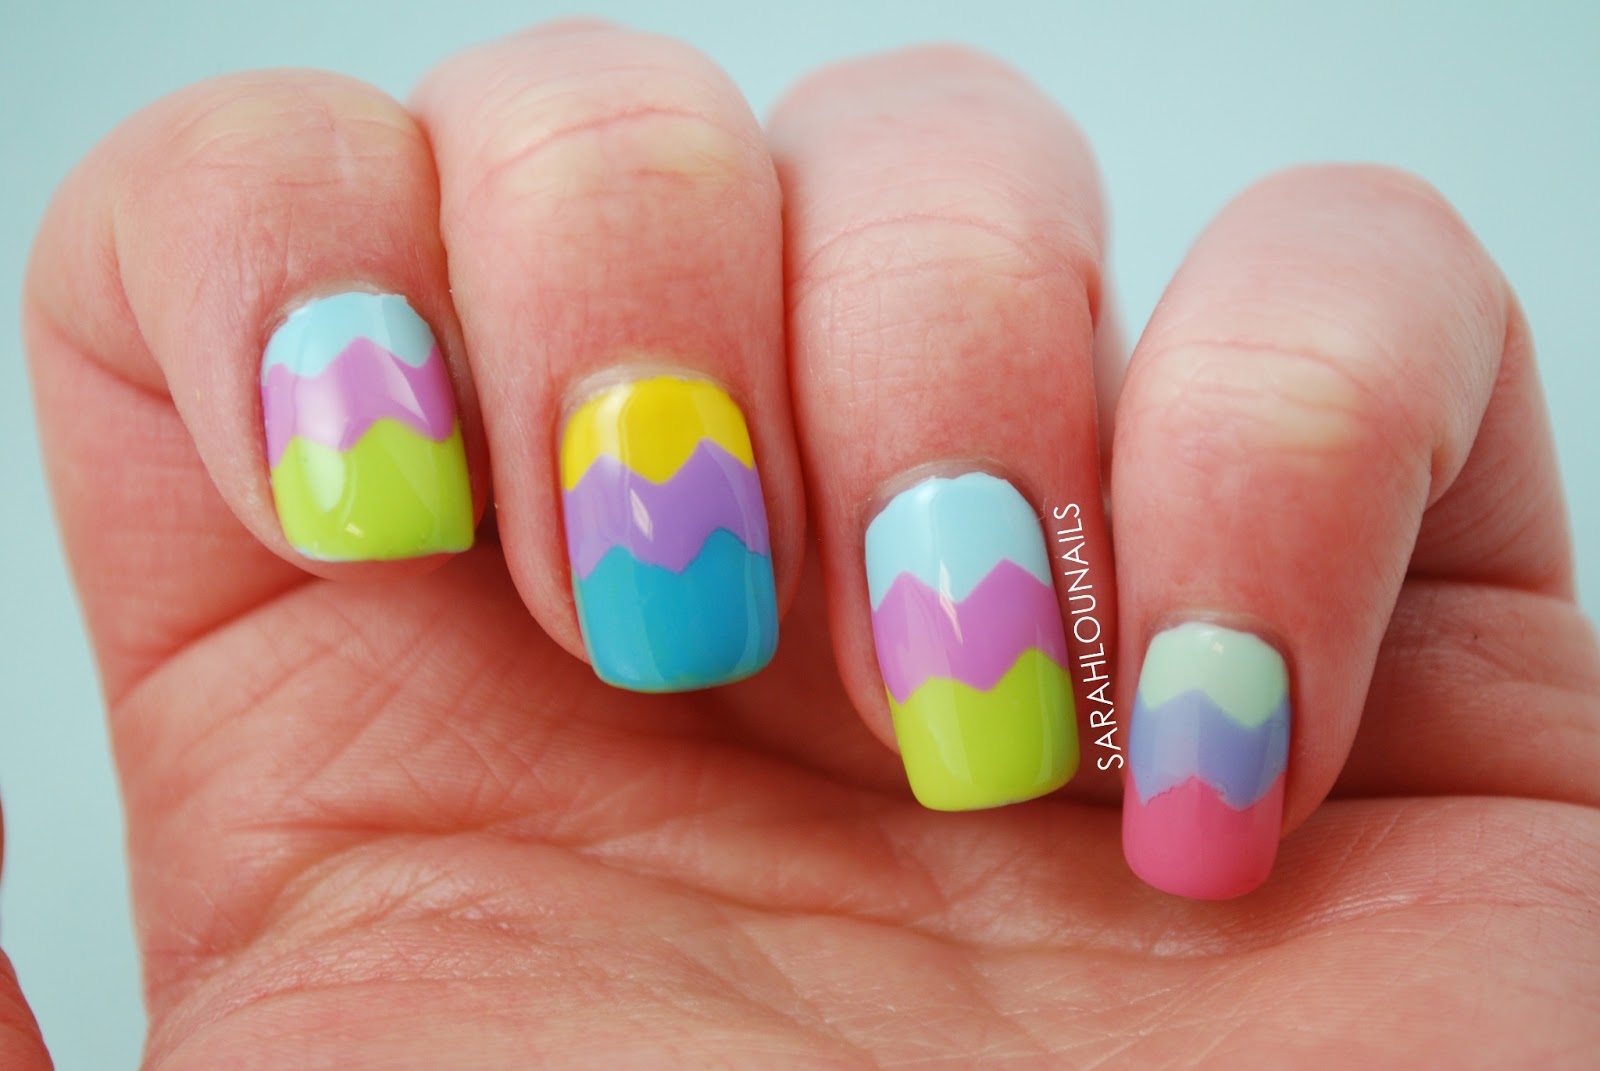 1. Easter Egg Acrylic Nails - wide 11